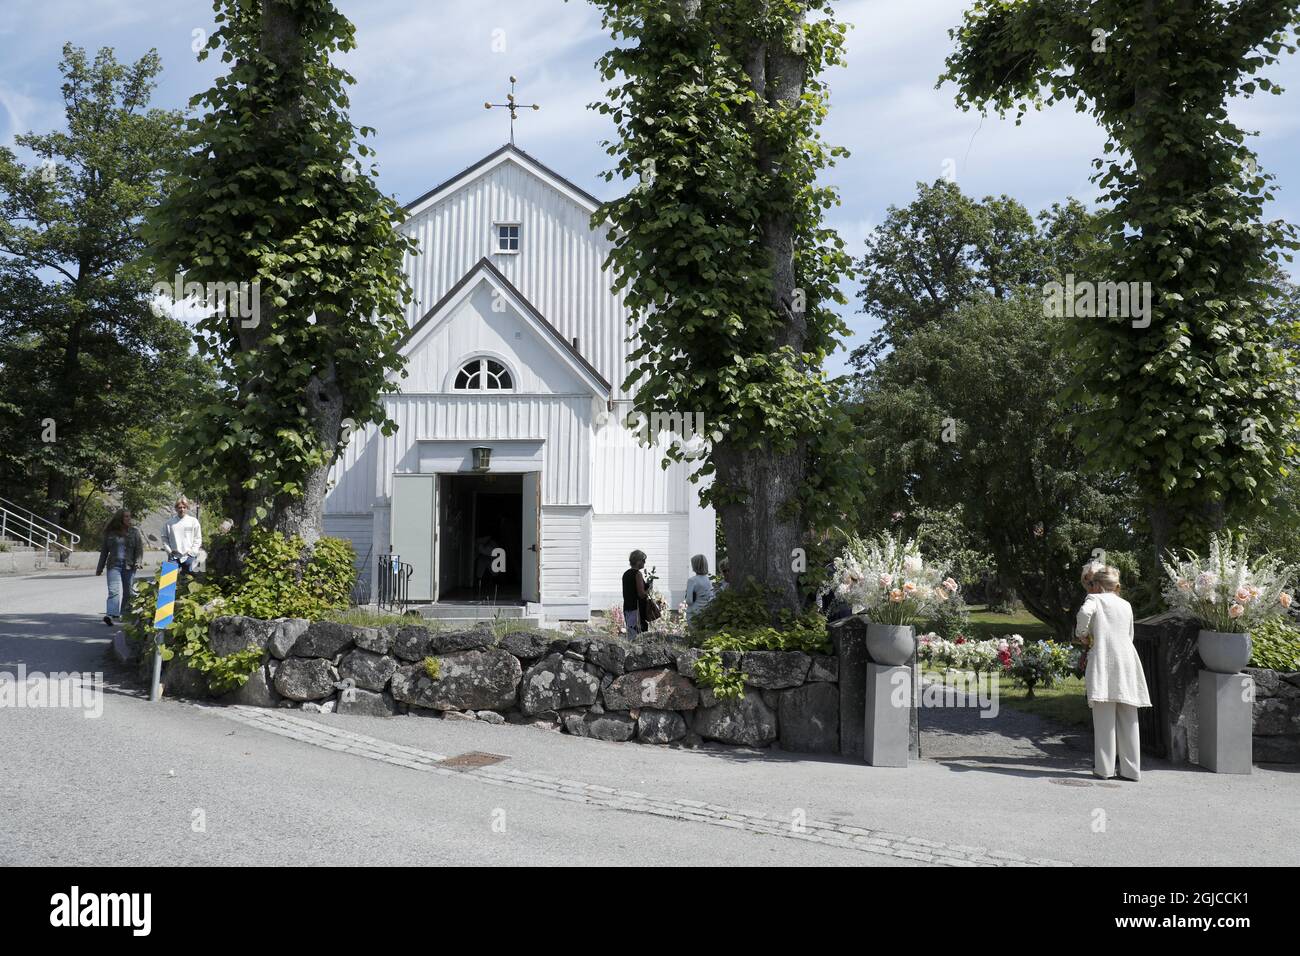 Funeral of Anki Wallenberg in Dalaro church, Stockholm, Sweden 19 July 2019 Anki Wallenberg died in a sailing accident on the lake Geneva. She resided in London and was a close friend to the Swedish Royal Family. (c) Patrik Osterberg / TT / kod 2857  Stock Photo